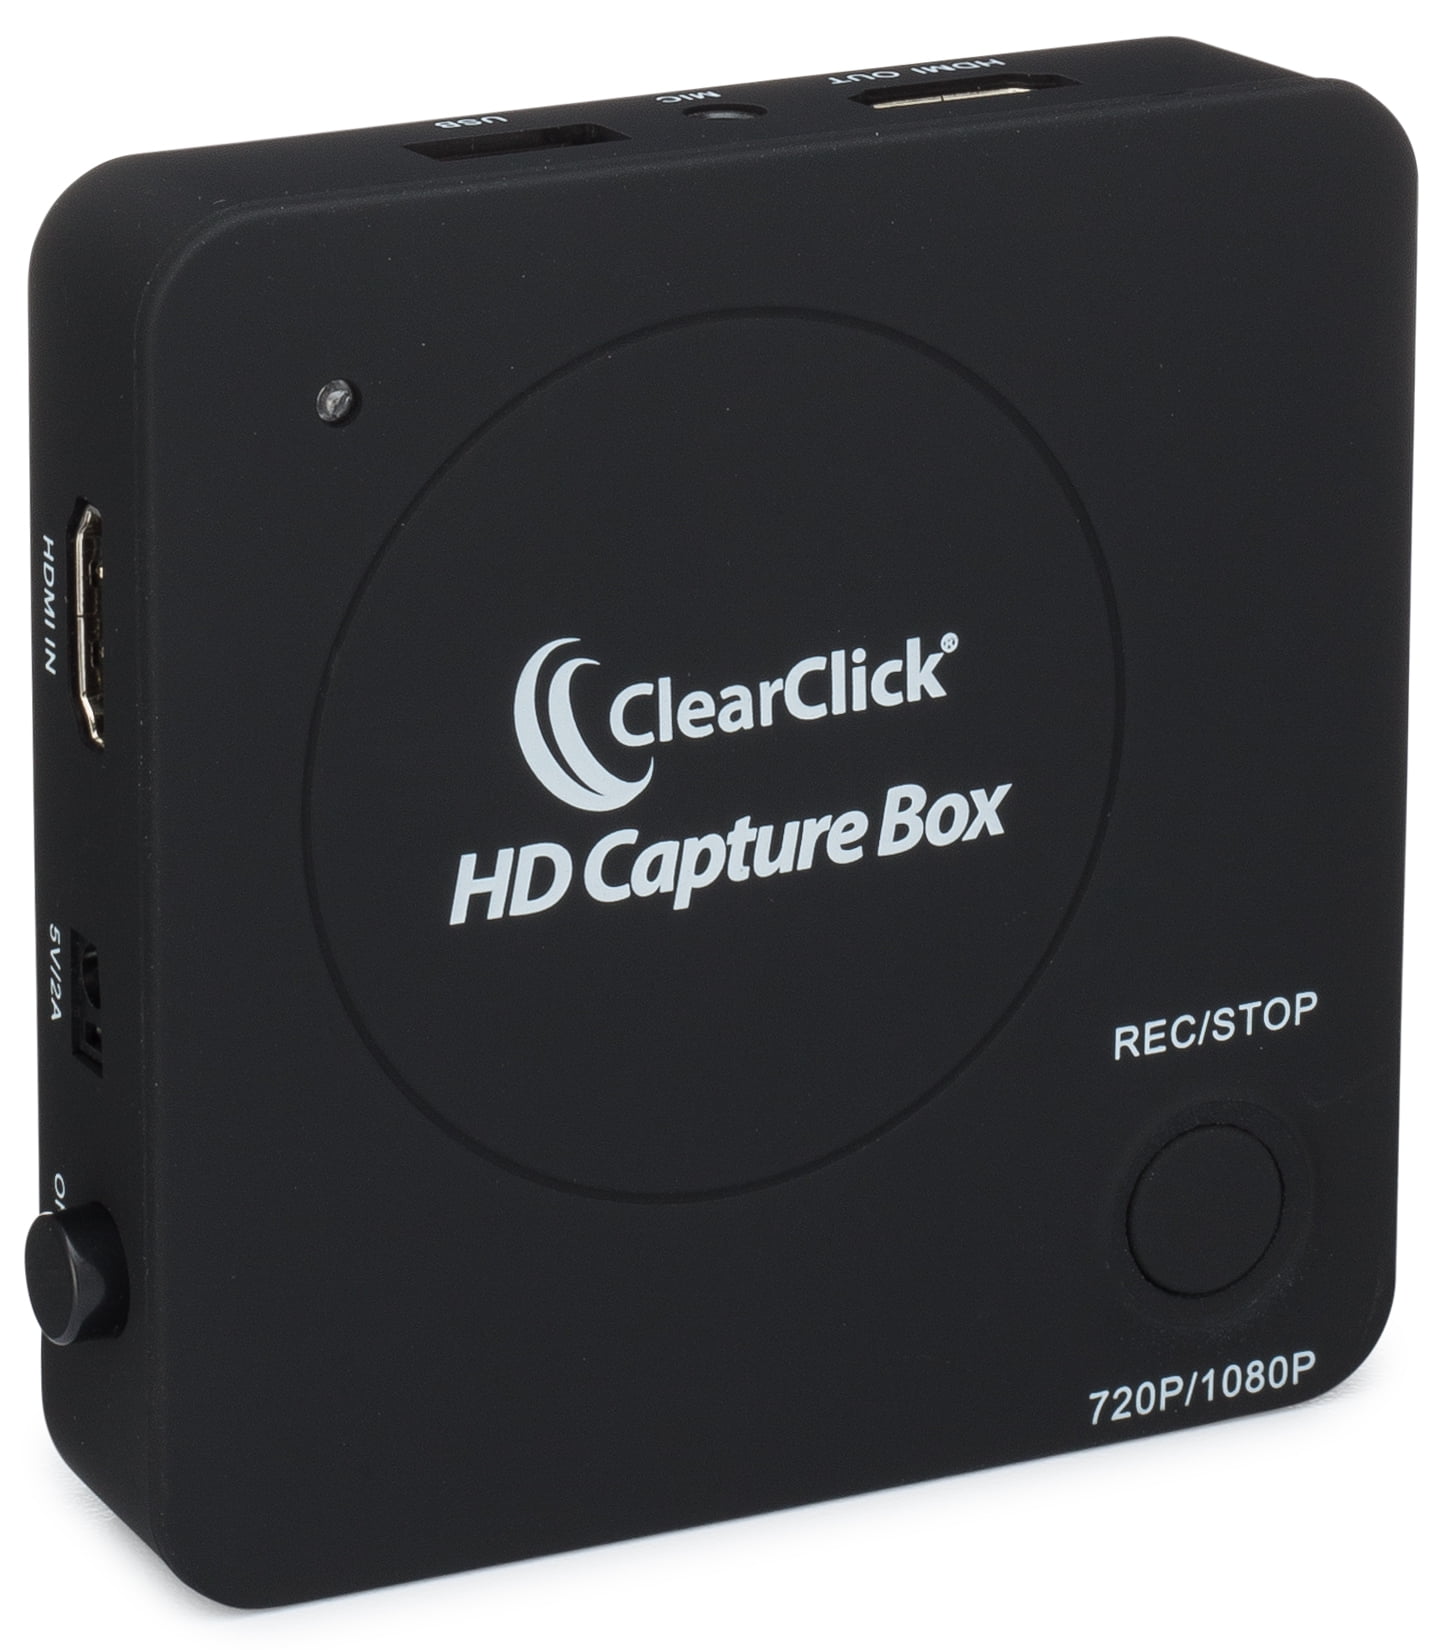 4K Edition No Computer Required and AV Video Sources ClearClick HD Video Capture Box Ultimate Up to 4K30 - Record and Stream Video from HDMI 